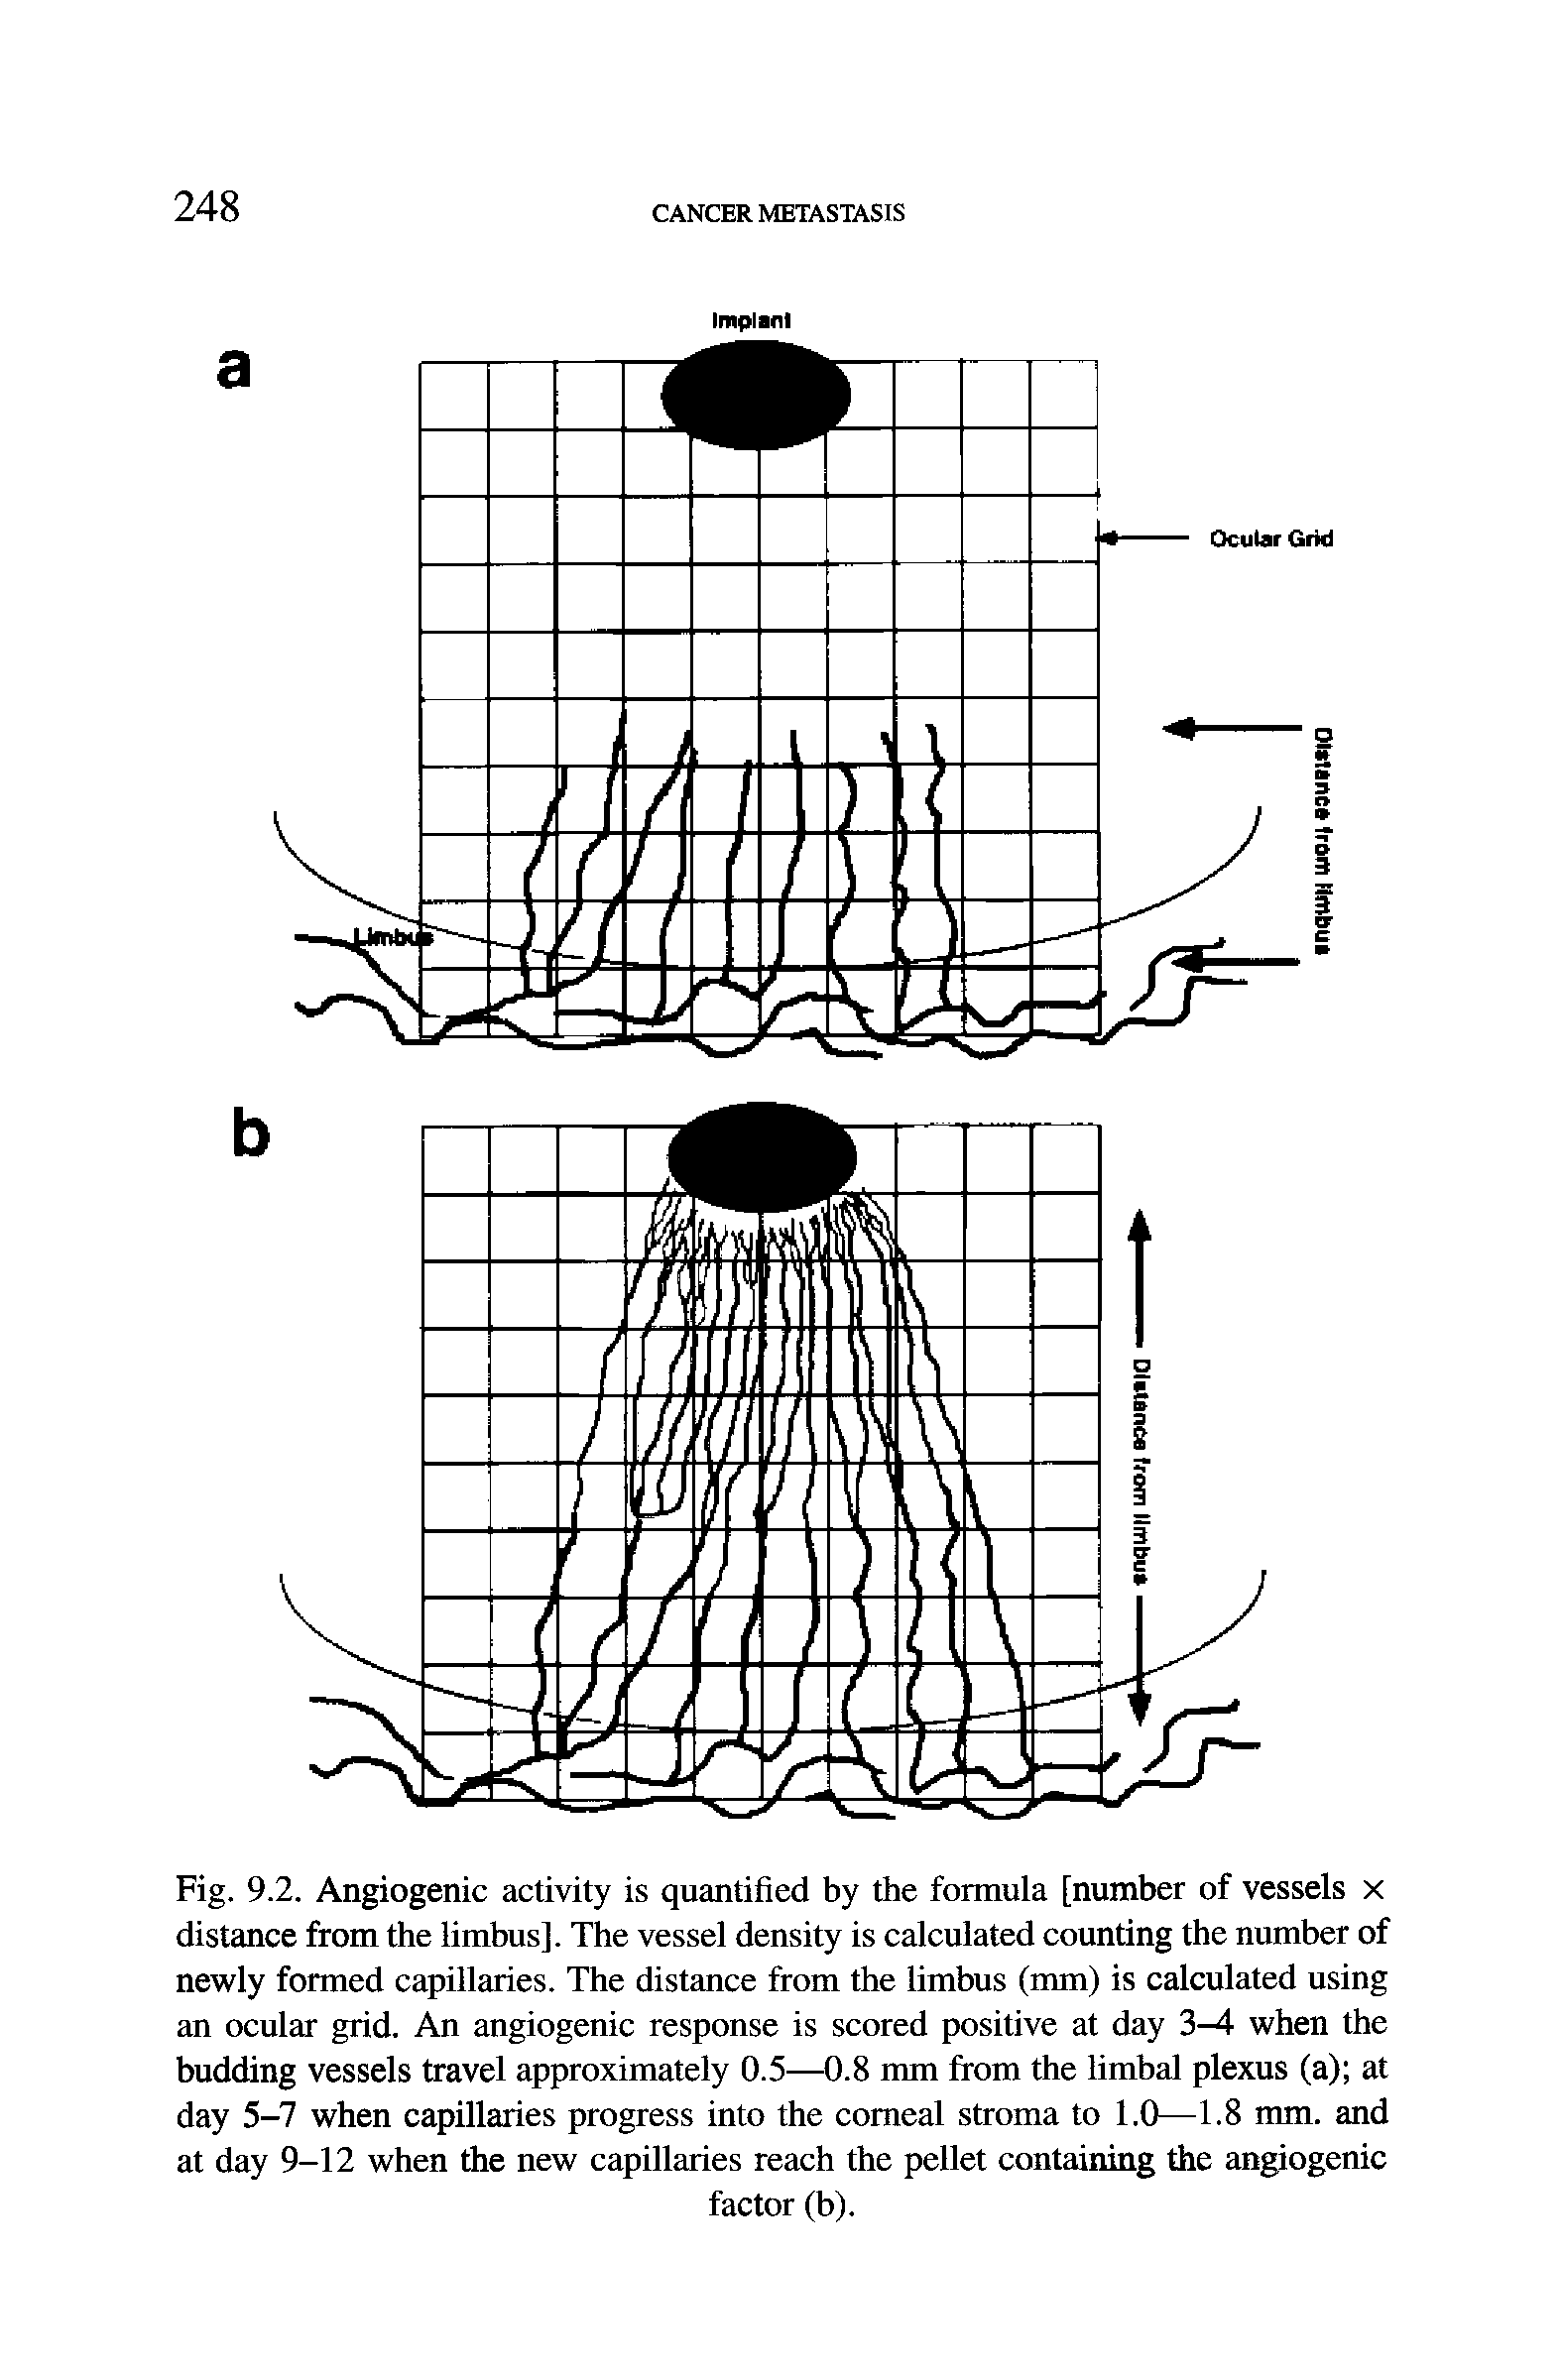 Fig. 9.2. Angiogenic activity is quantified by the formula [number of vessels x distance from the limbus]. The vessel density is calculated counting the number of newly formed capillaries. The distance from the limbus (mm) is calculated using an ocular grid. An angiogenic response is scored positive at day 3-4 when the budding vessels travel approximately 0.5—0.8 mm from the limhal plexus (a) at day 5-7 when capillaries progress into the comeal stroma to 1.0—1.8 mm. and at day 9-12 when the new capillaries reach the pellet containing the angiogenic...